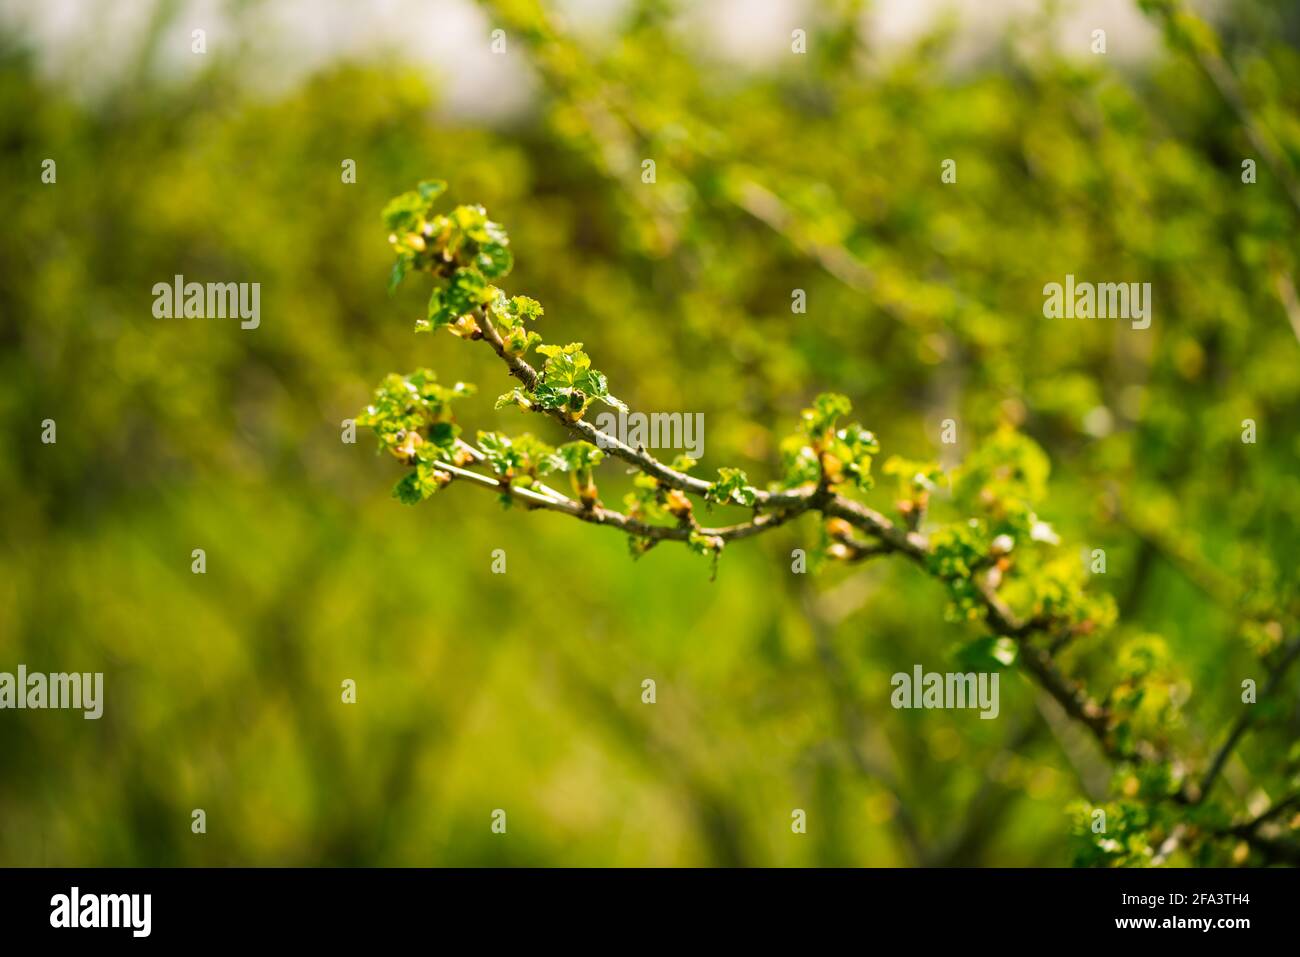 fresh new buds on currant branches at springtime farm garden background Stock Photo